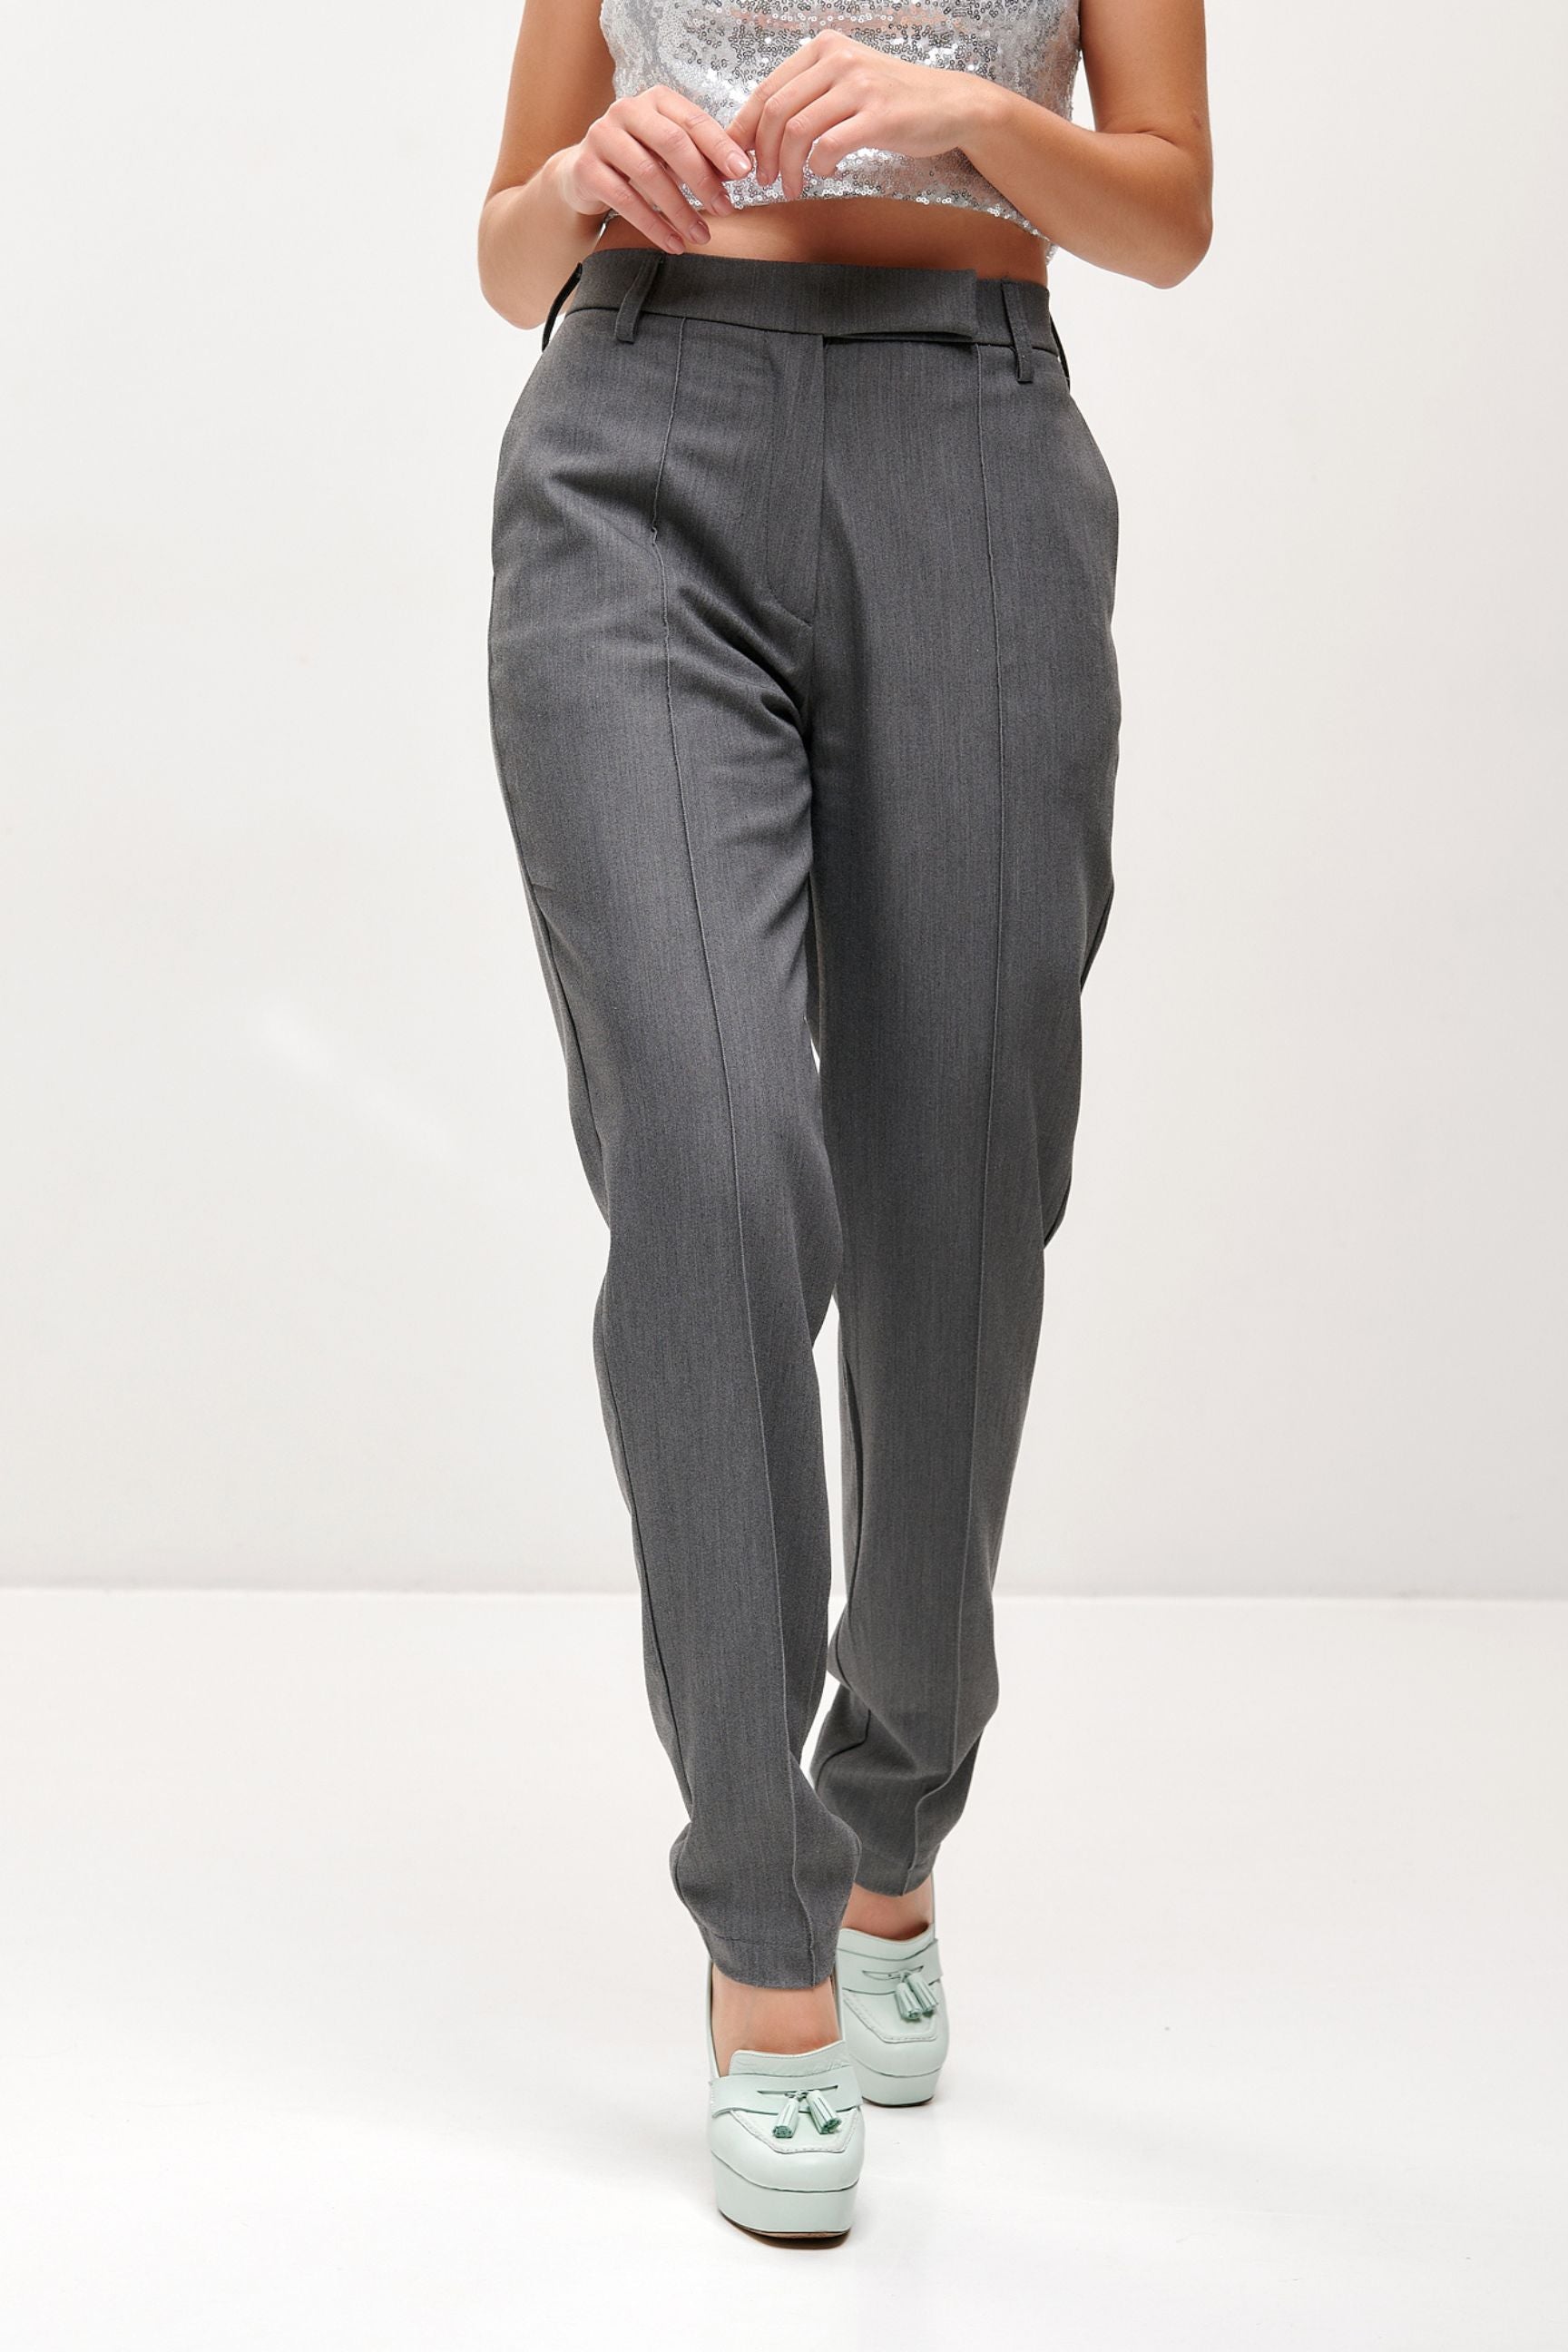 High Waist Business Pants for Ladies